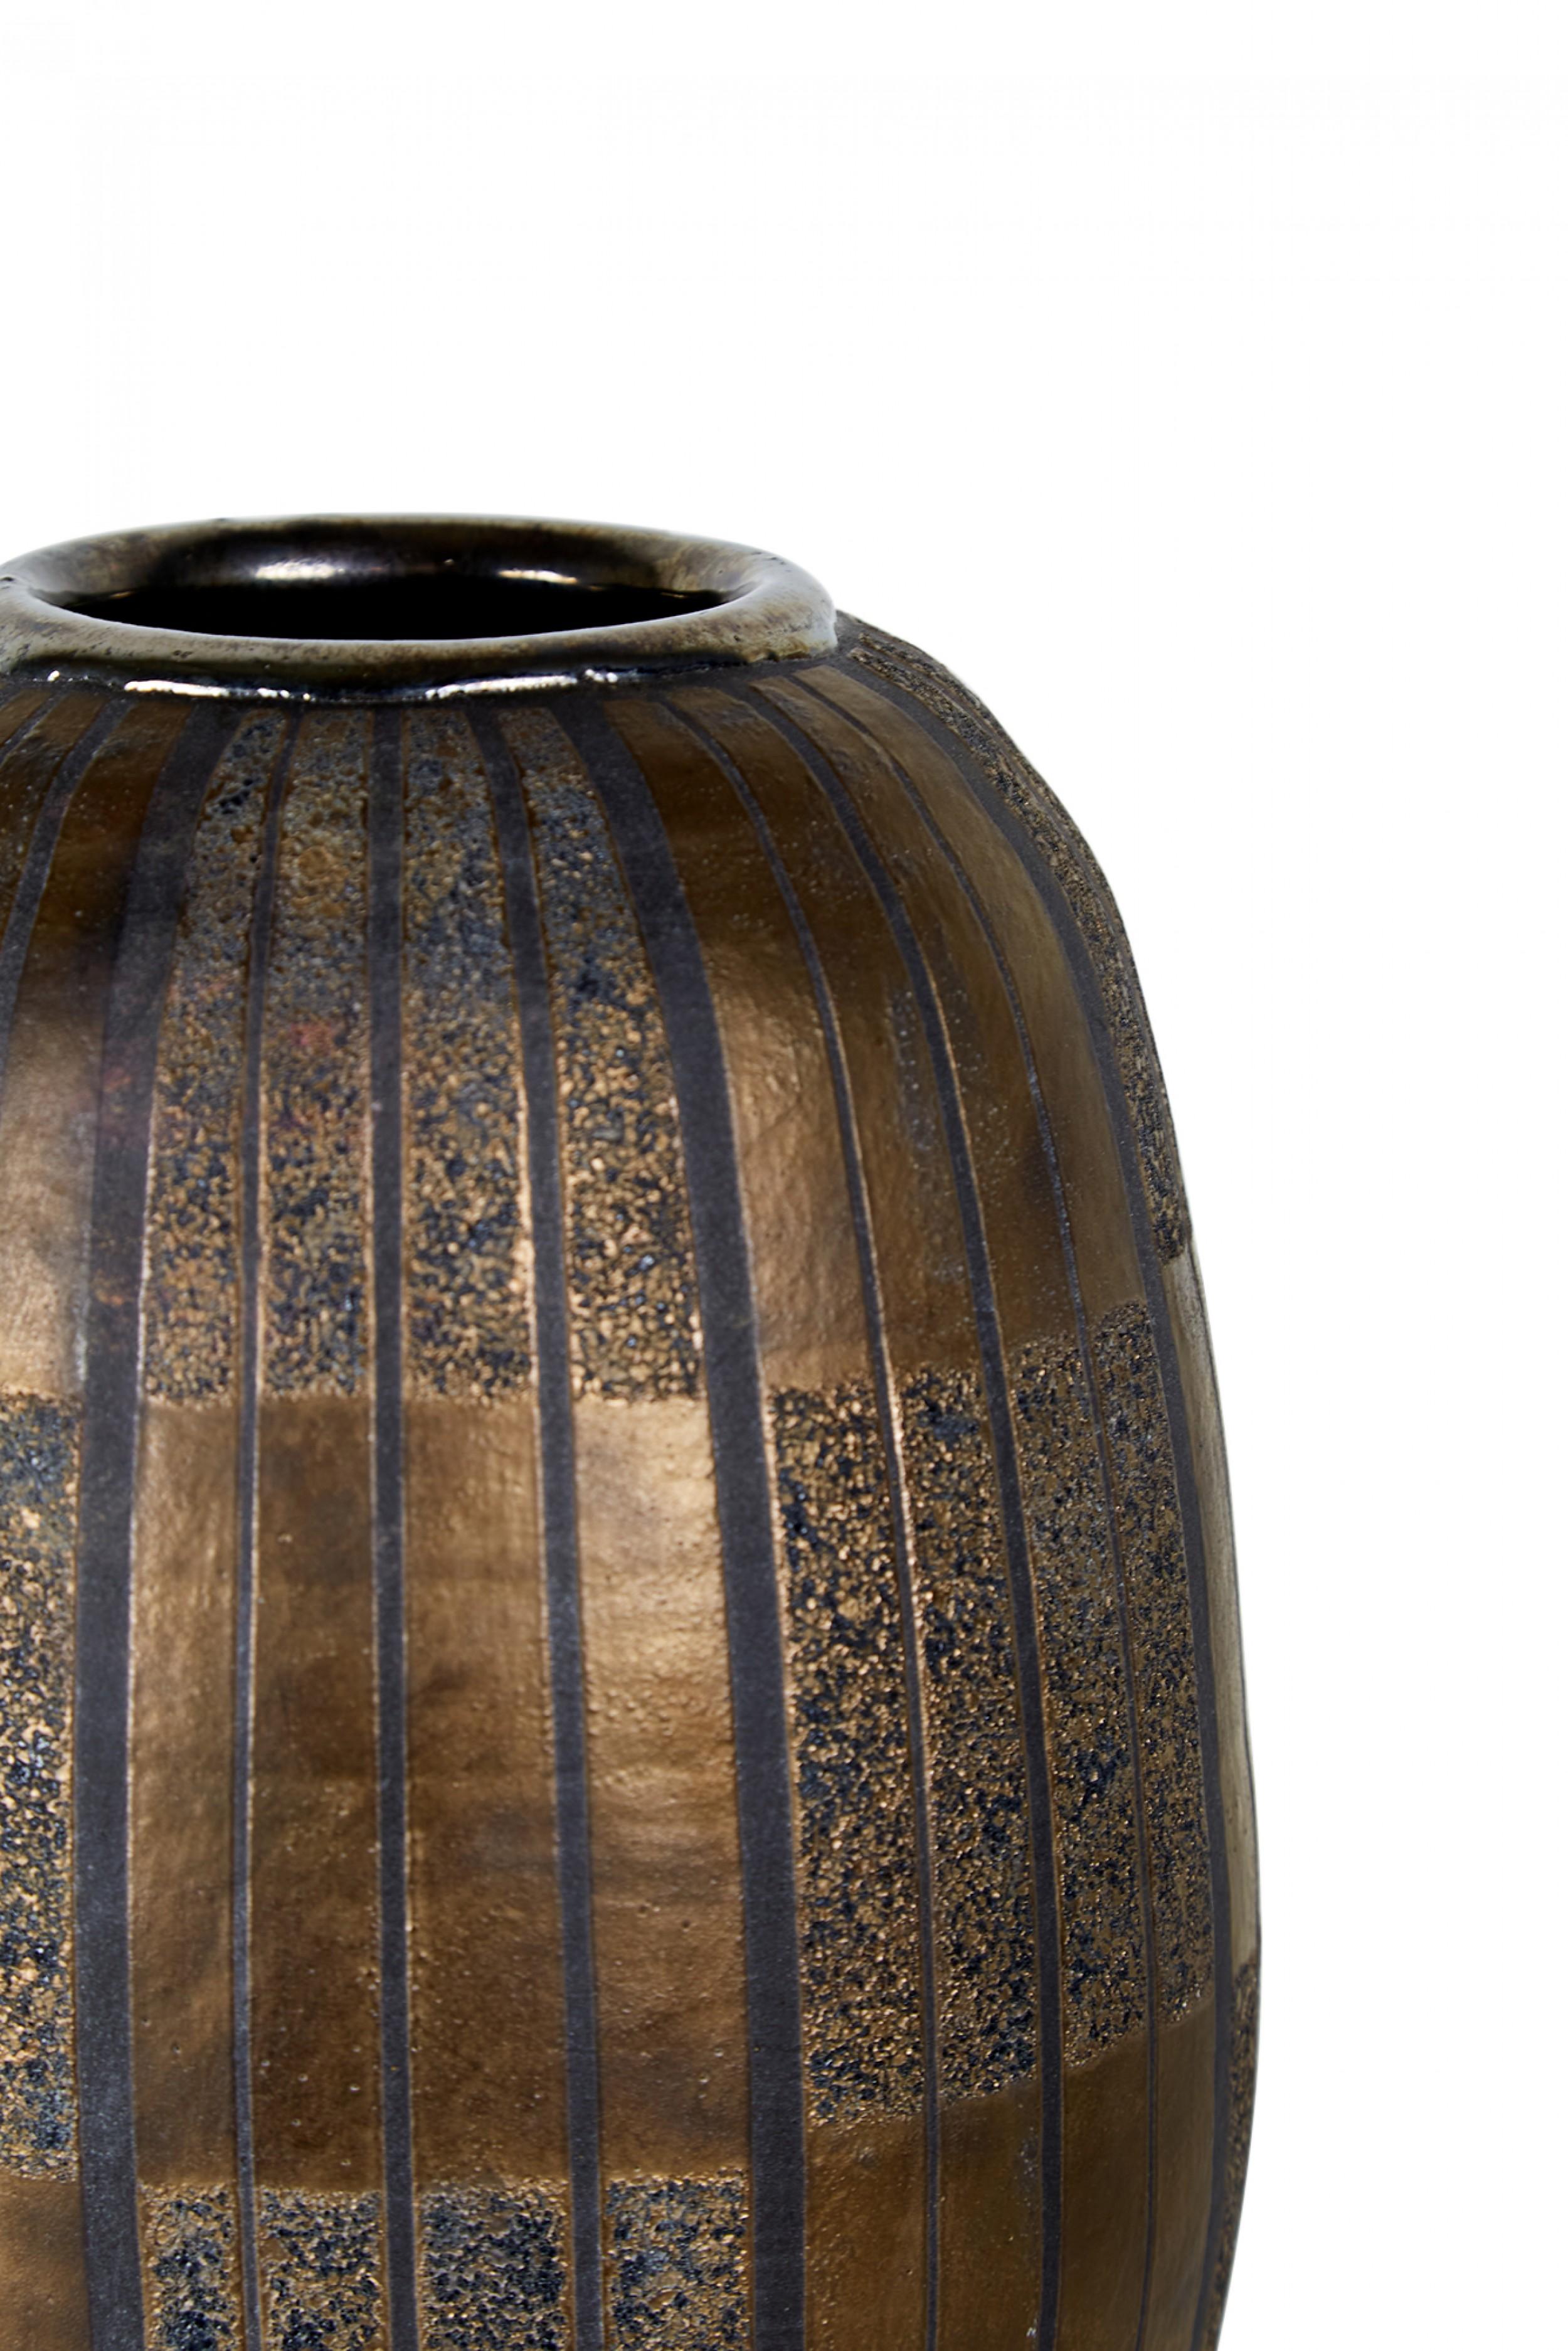 Contemporary thrown clay vase with a cylindrical form with rounded top and bottom and incised vertical stripes, finished with a metallic bronze and black glaze. (GARY DI PASQUALE) (Companion piece: NWL6472).